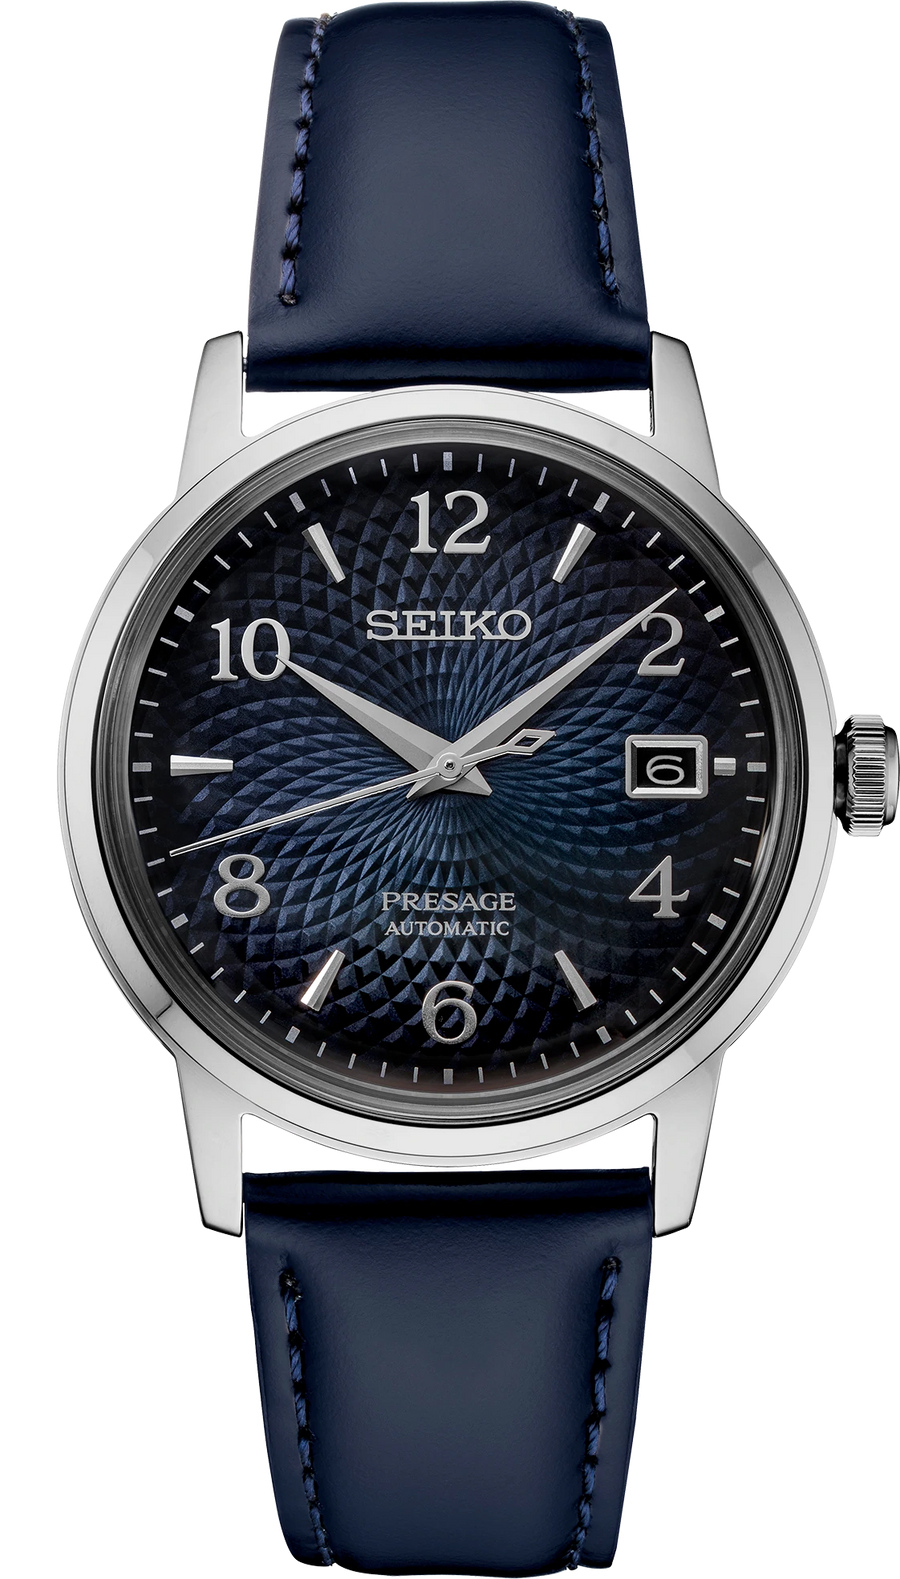 Seiko Presage SRPE43 Cocktail Time Blue Dial 38.5mm Watch 